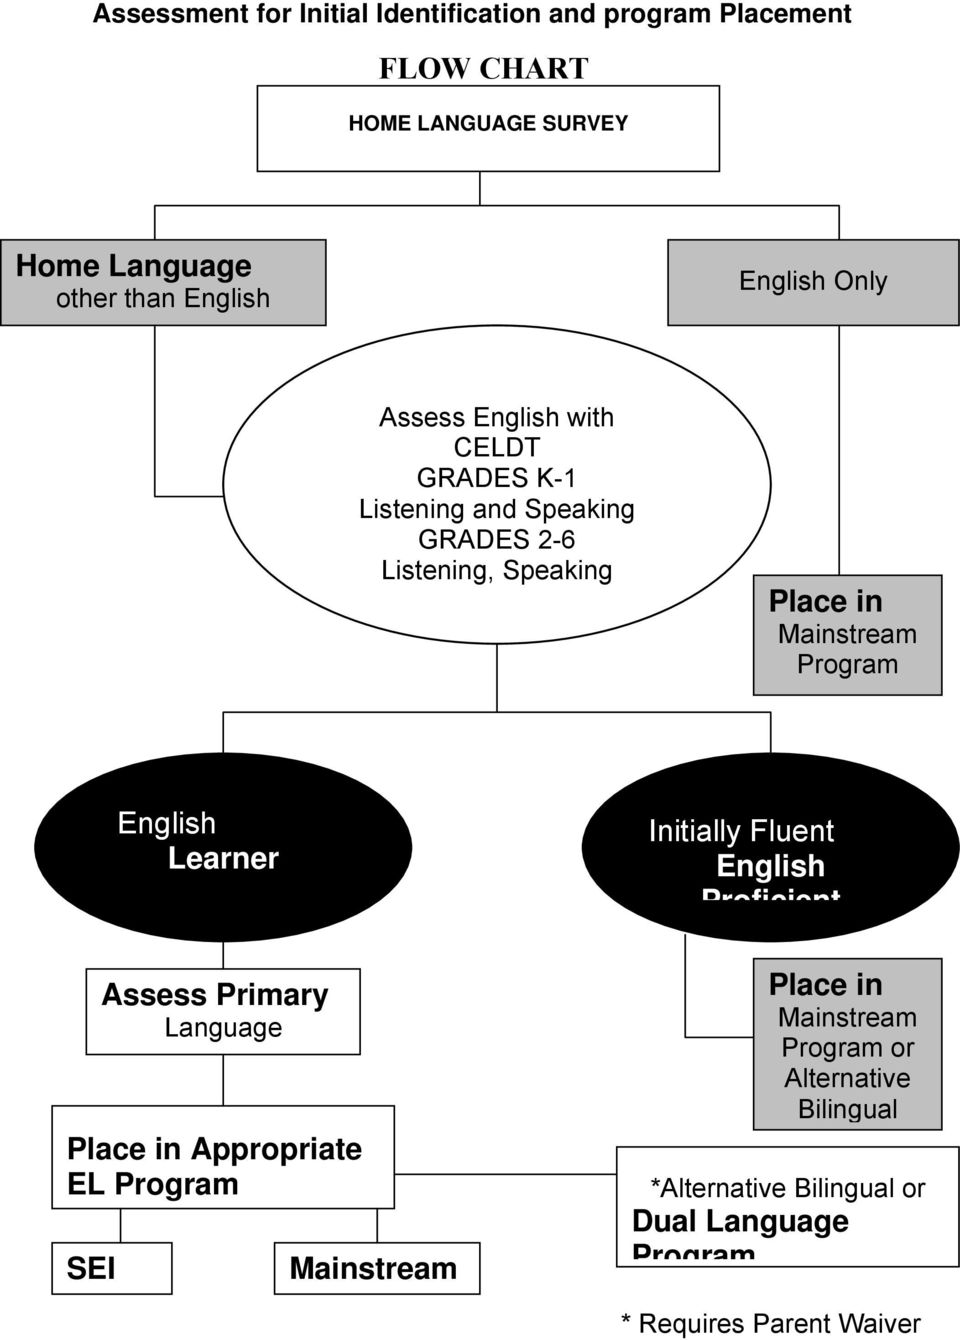 Program English Learner Assess Primary Language Place in Appropriate EL Program SEI Mainstream Initially Fluent English